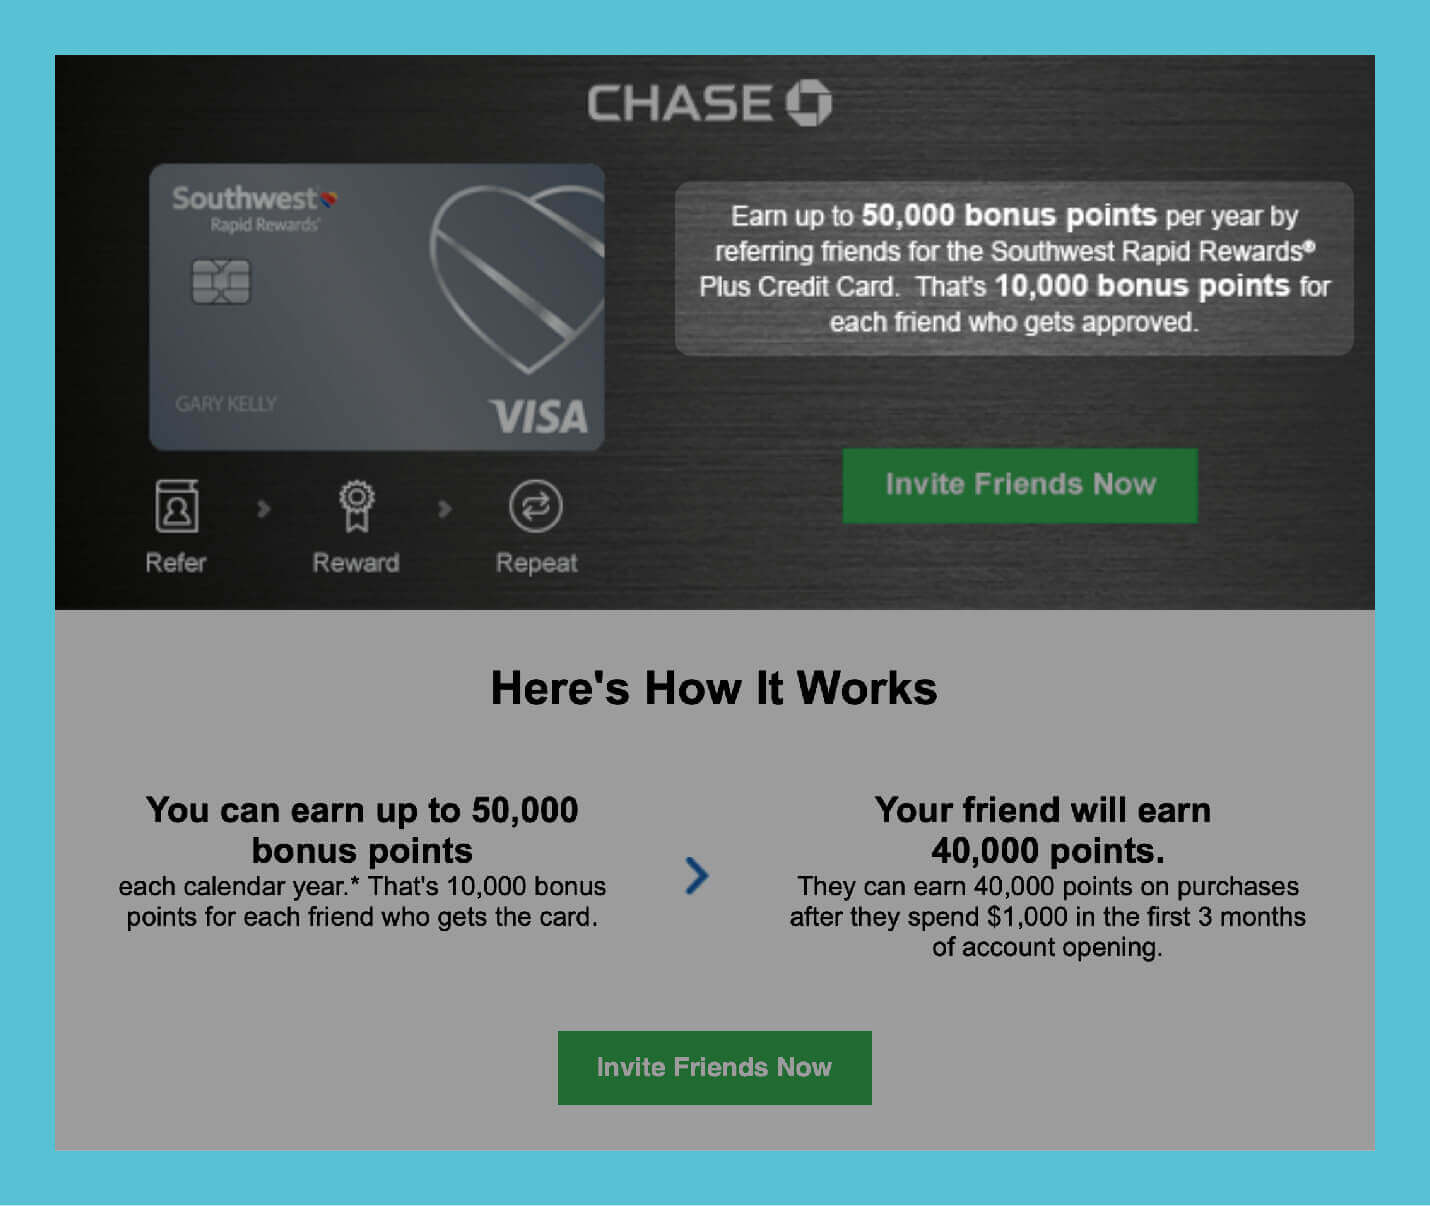 referral email from chase offering large valuable prize for referrals